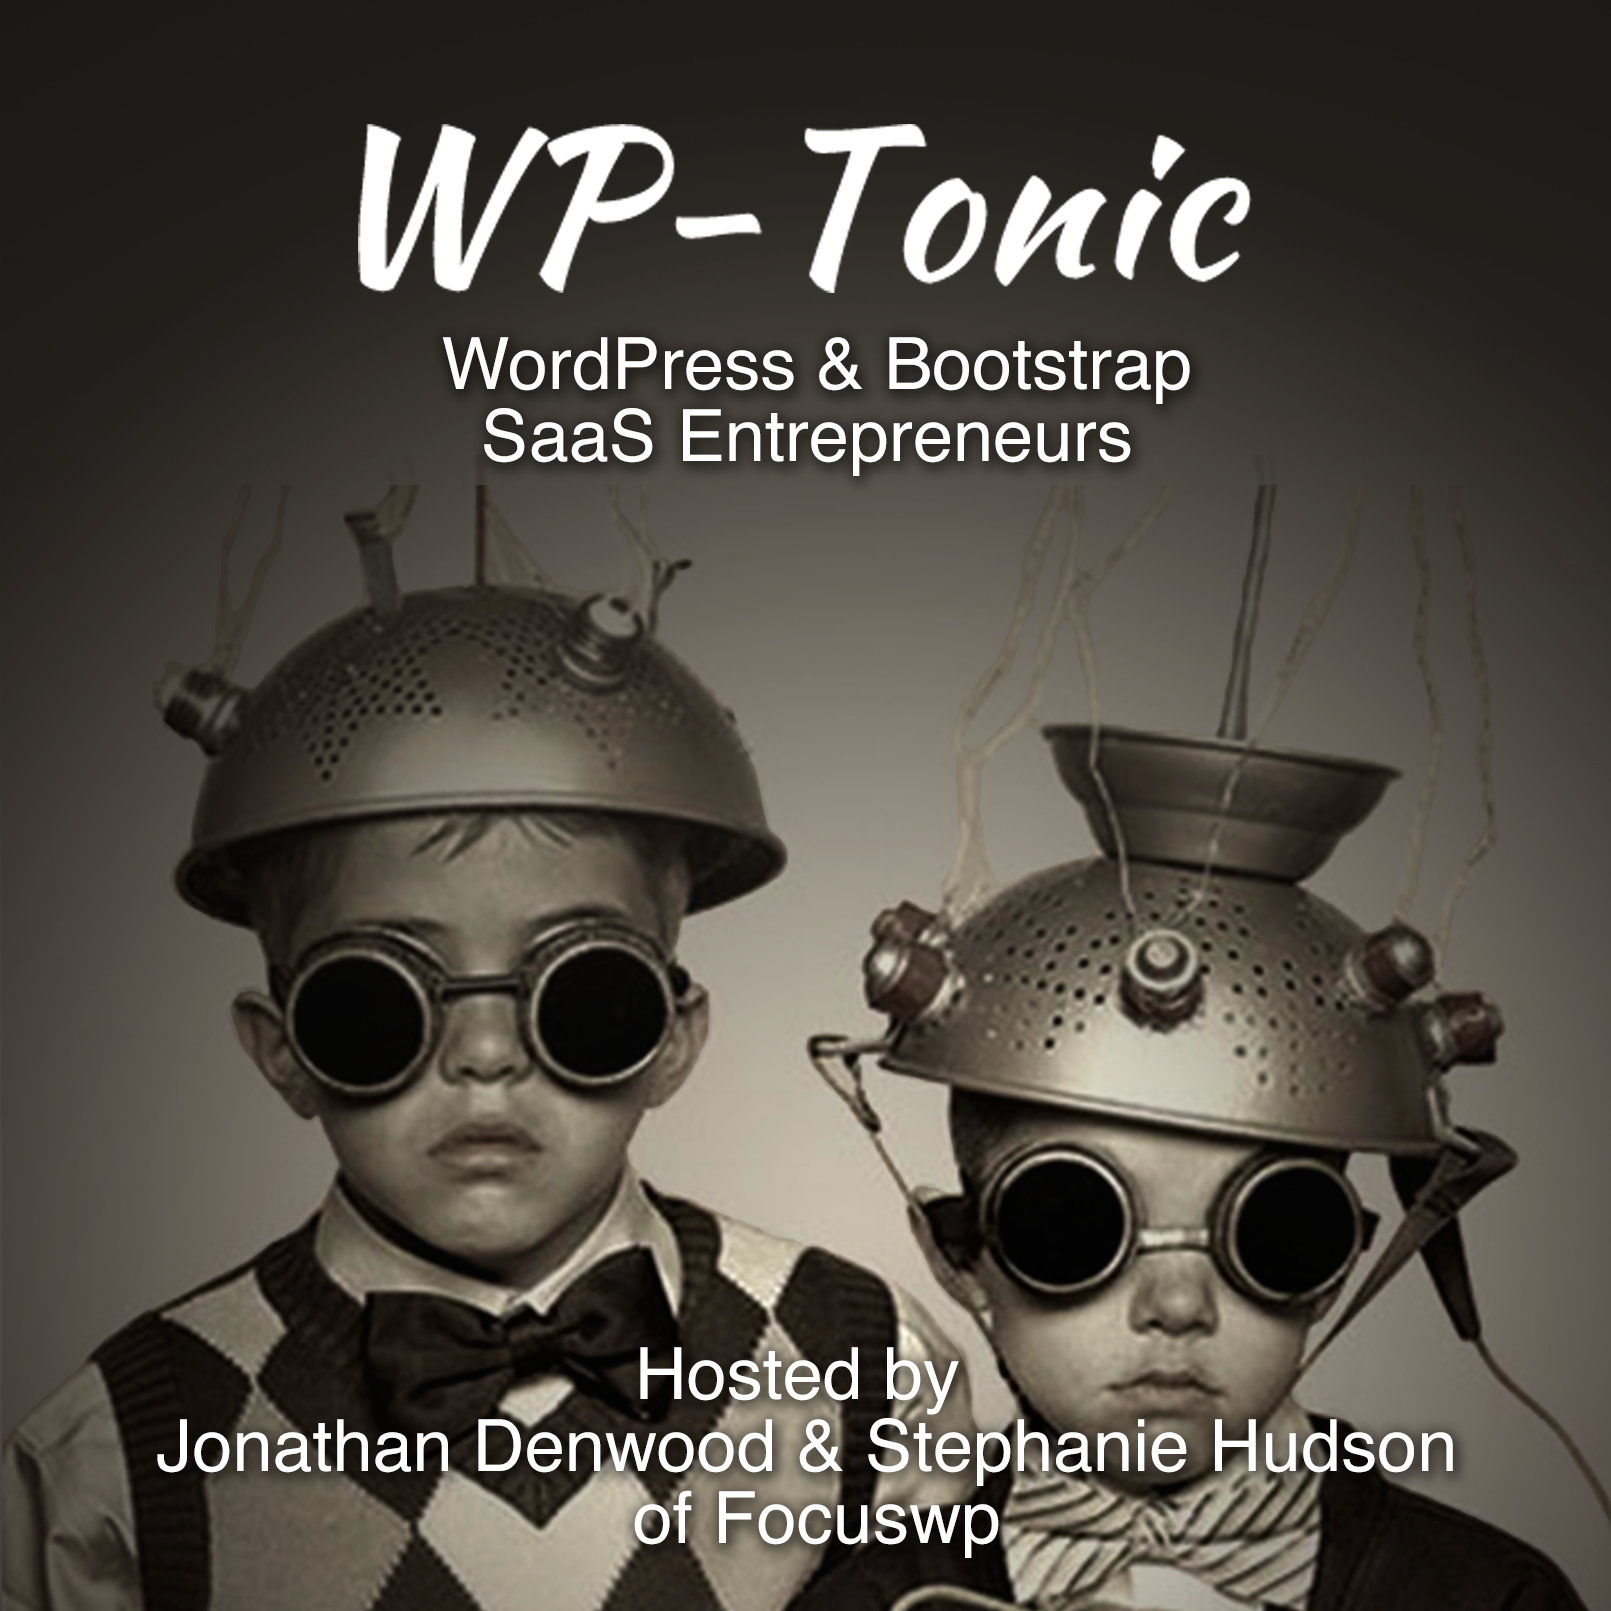 #533 WP-Tonic Round-Table Show on Friday,September 25th, 2020 at 8:30 am PST